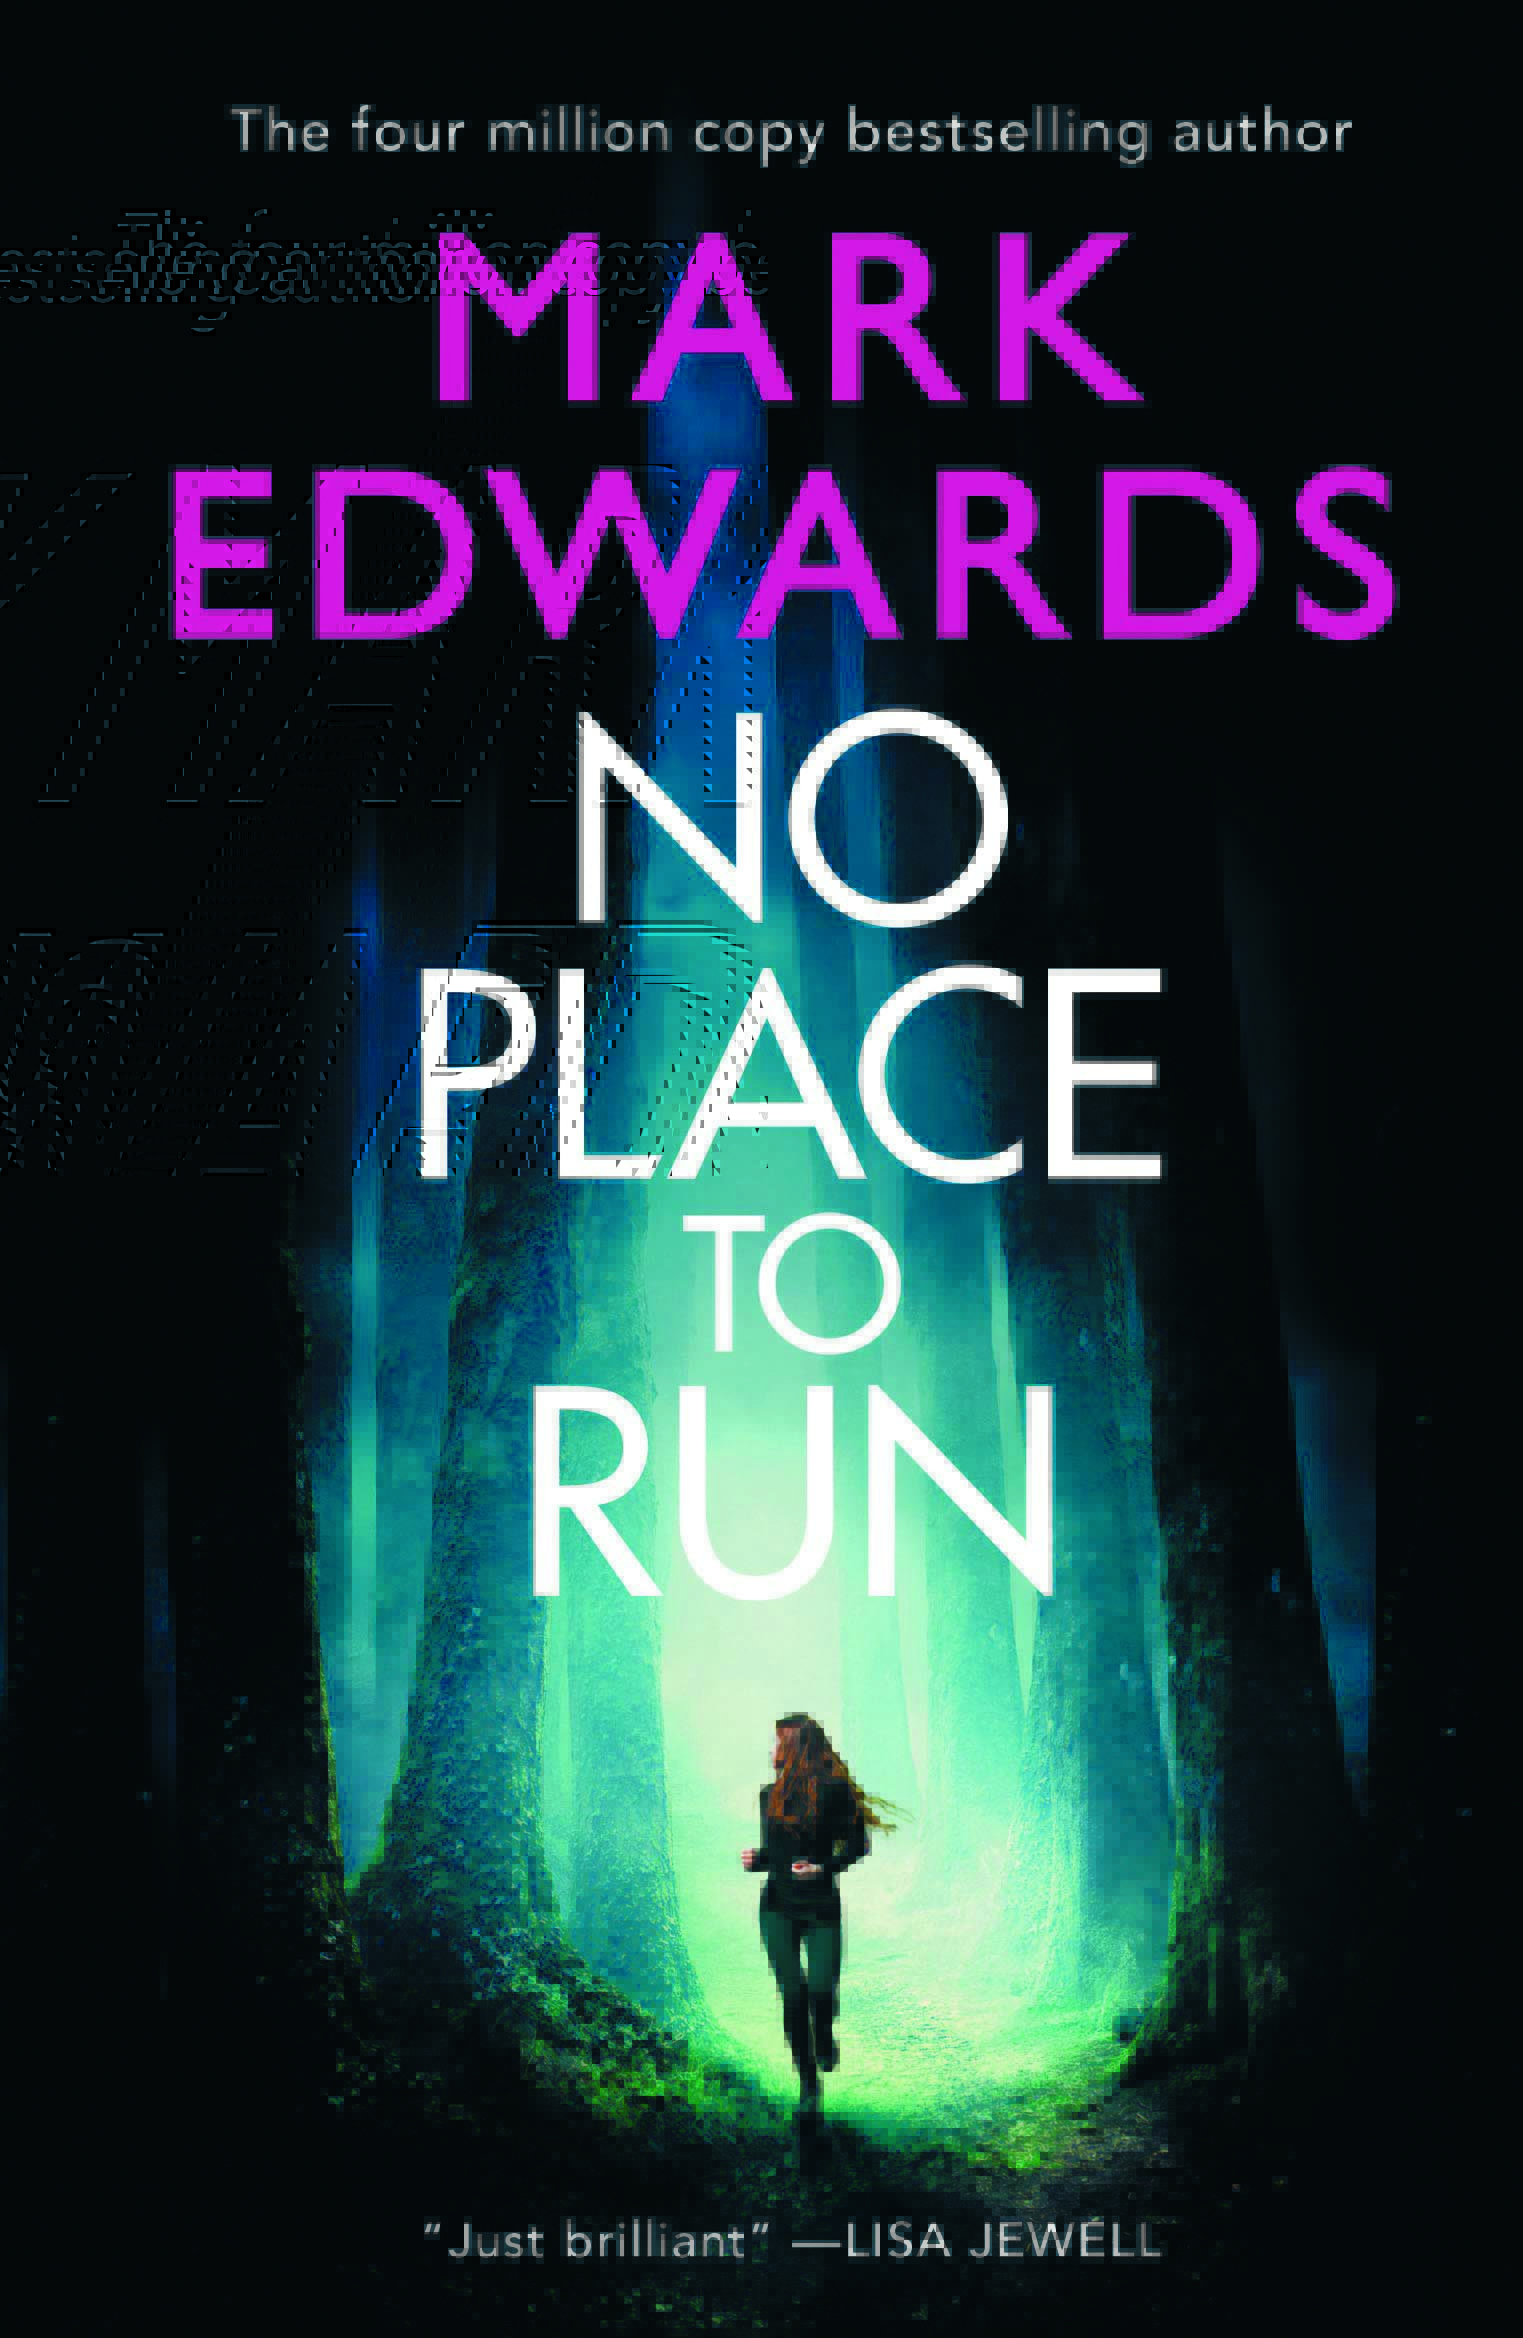 No Place To Run by Mark Edwards